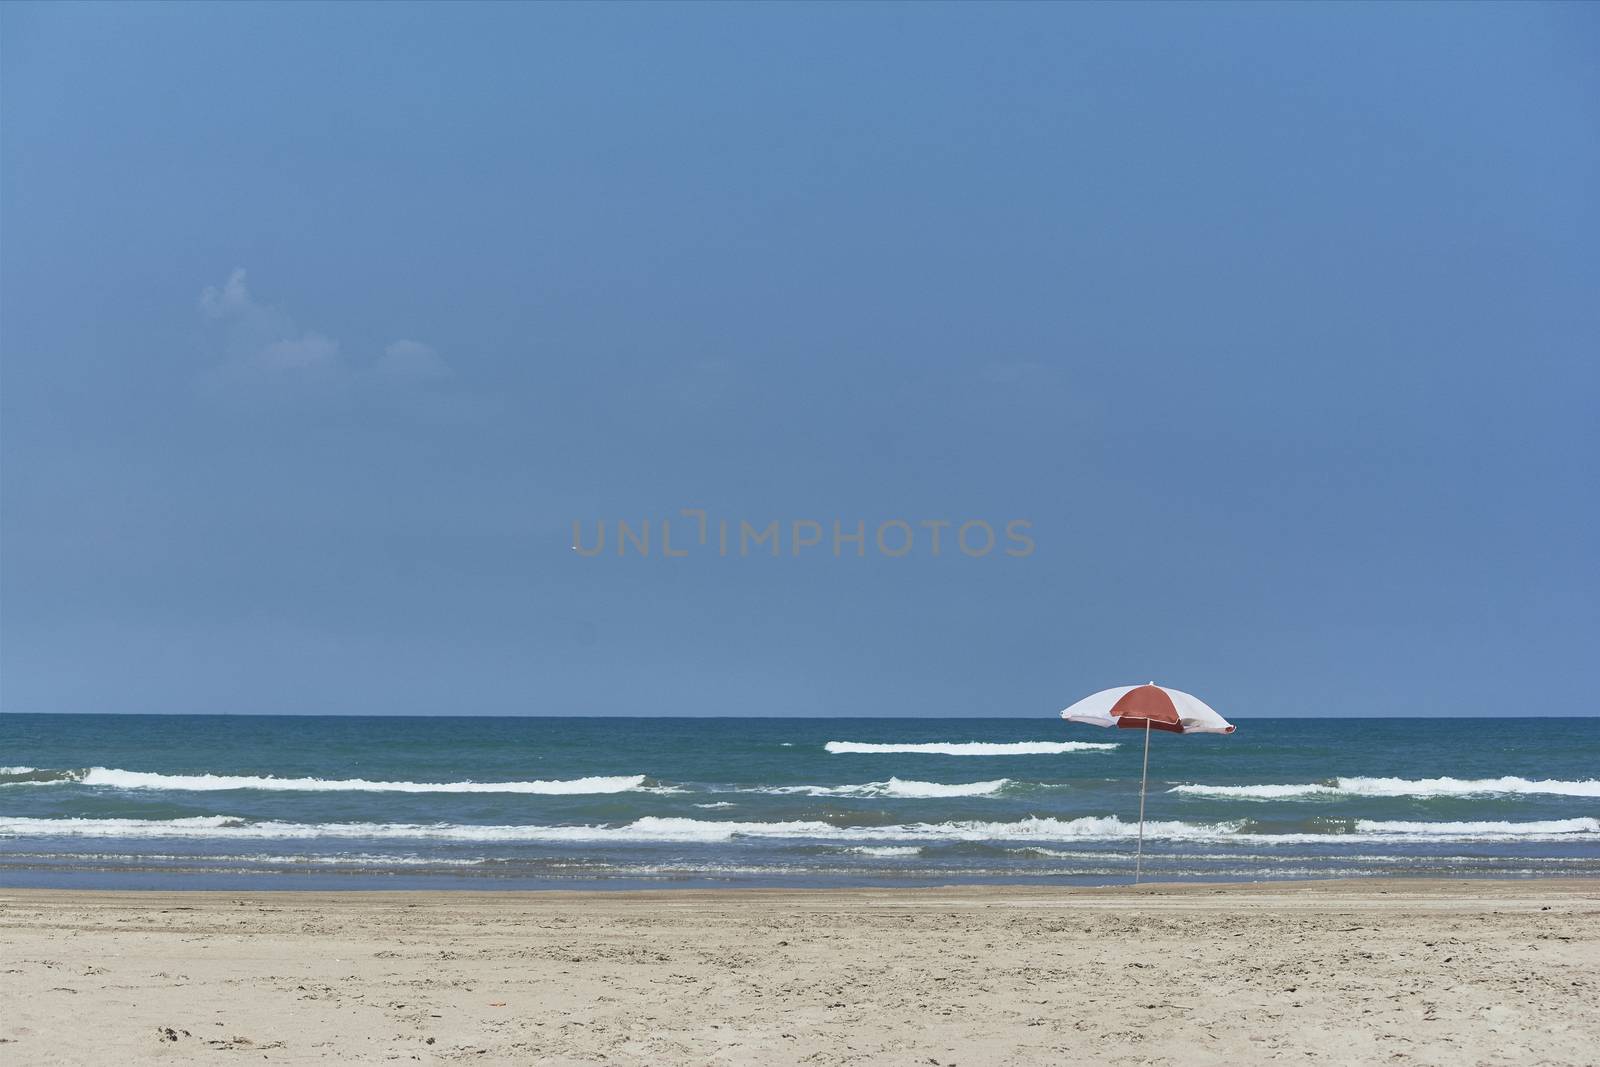 Umbrella and sunbed at the beach landscape with a great blue sky